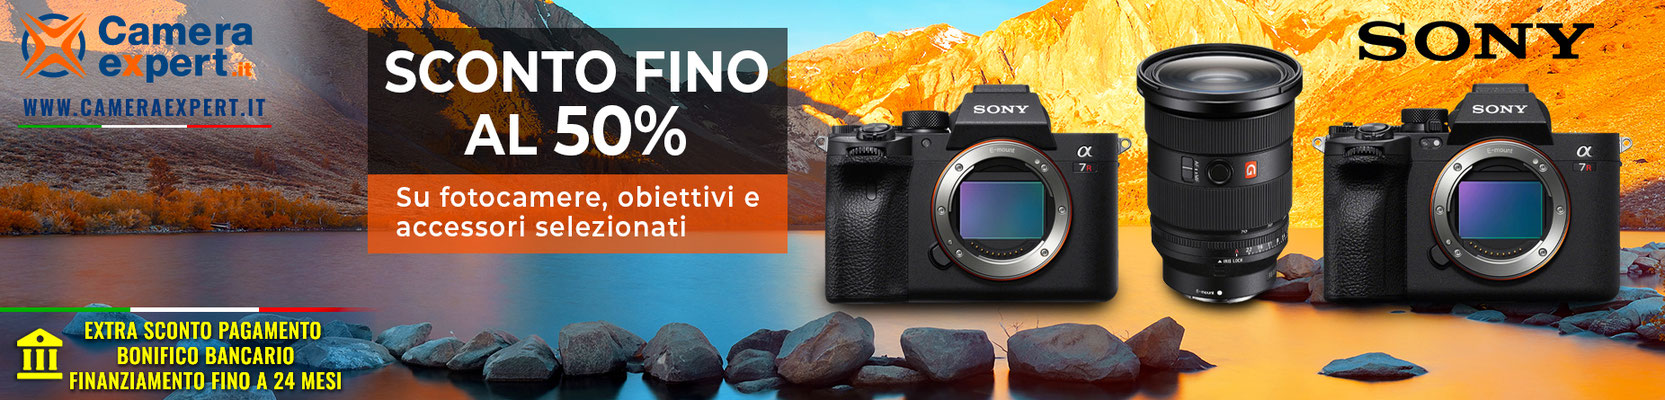 Camera Expert.it Ads Banner Design for Sony promotion - It is my personal work for an existing business where I work as a graphic designer (https://cameraexpert.it/) - Copyright 2023